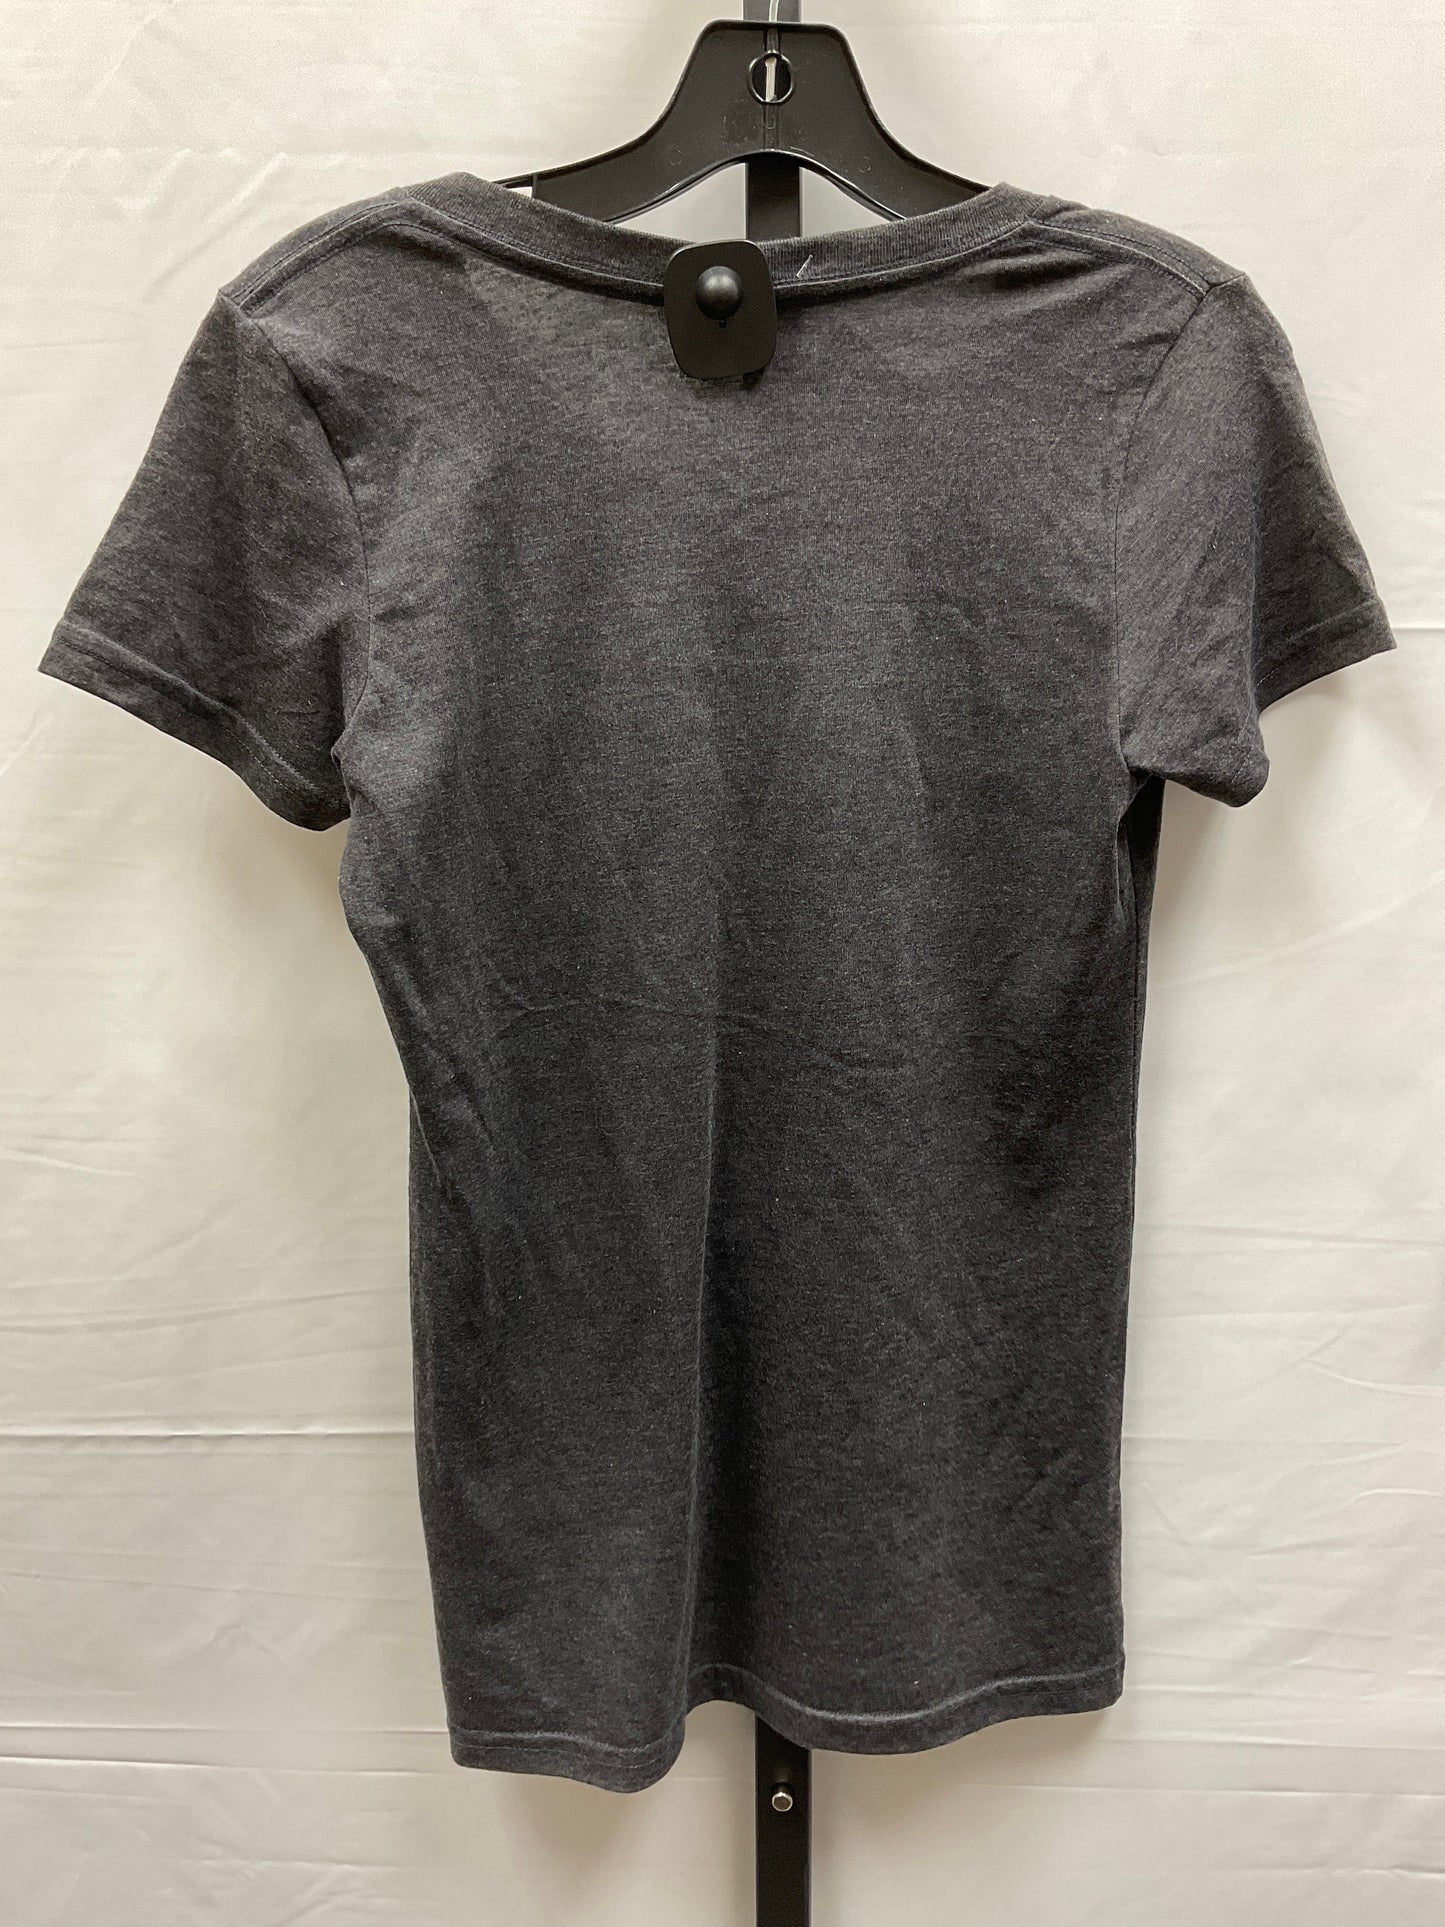 Grey Top Short Sleeve Basic Clothes Mentor, Size M